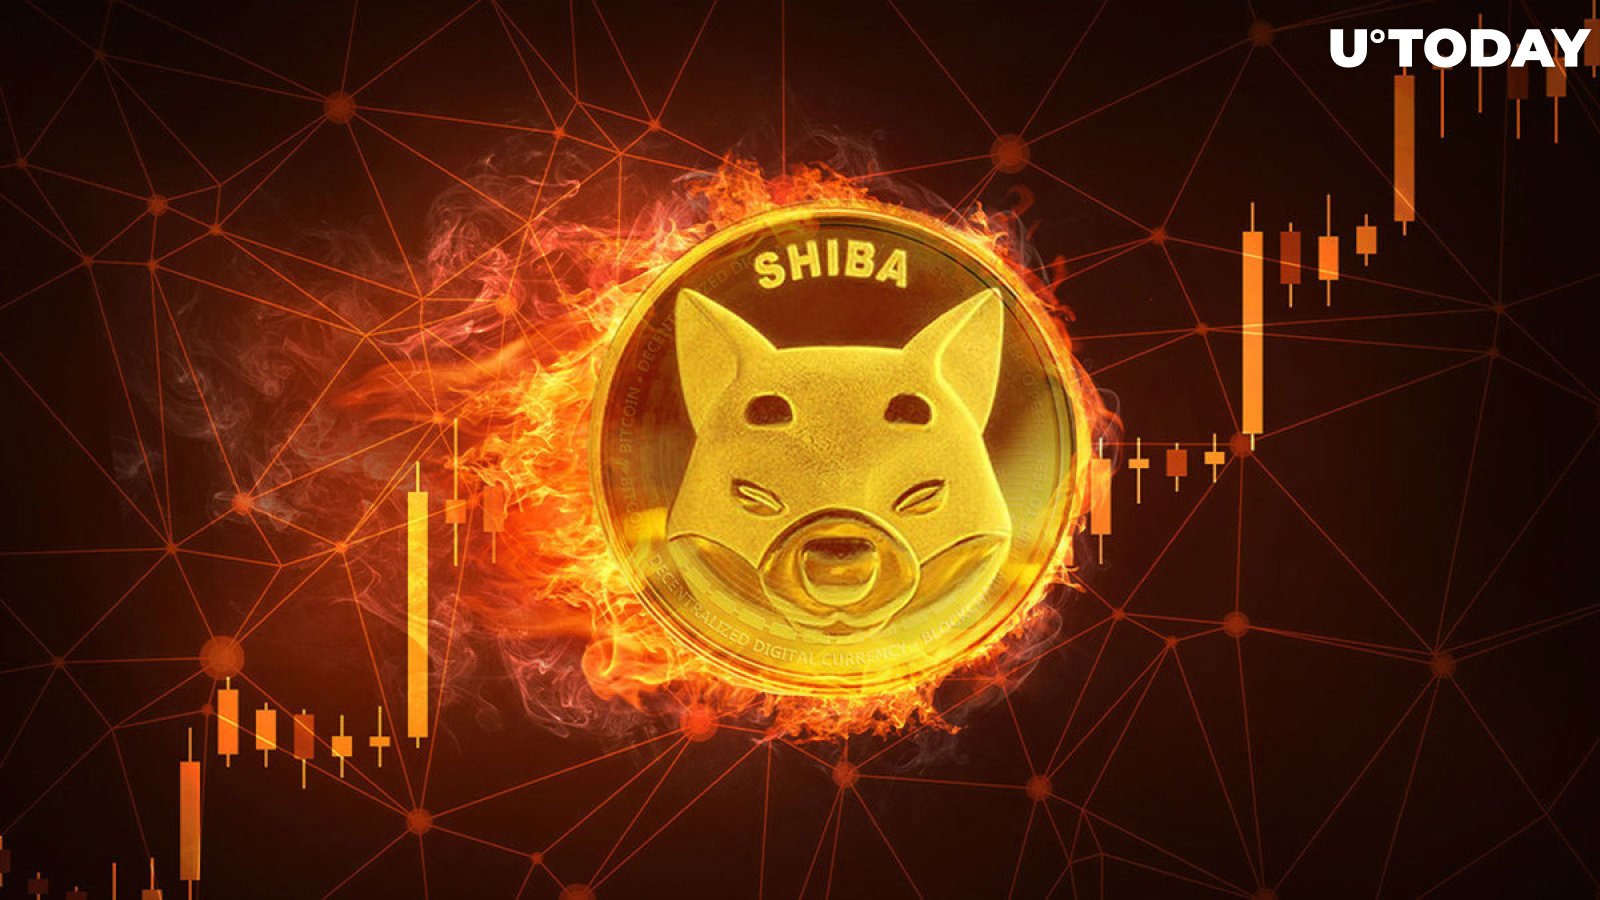 SHIB Burn Rate 5,761% Up as Shiba Inu Surpasses Wrapped Bitcoin (WBTC) by This Metric